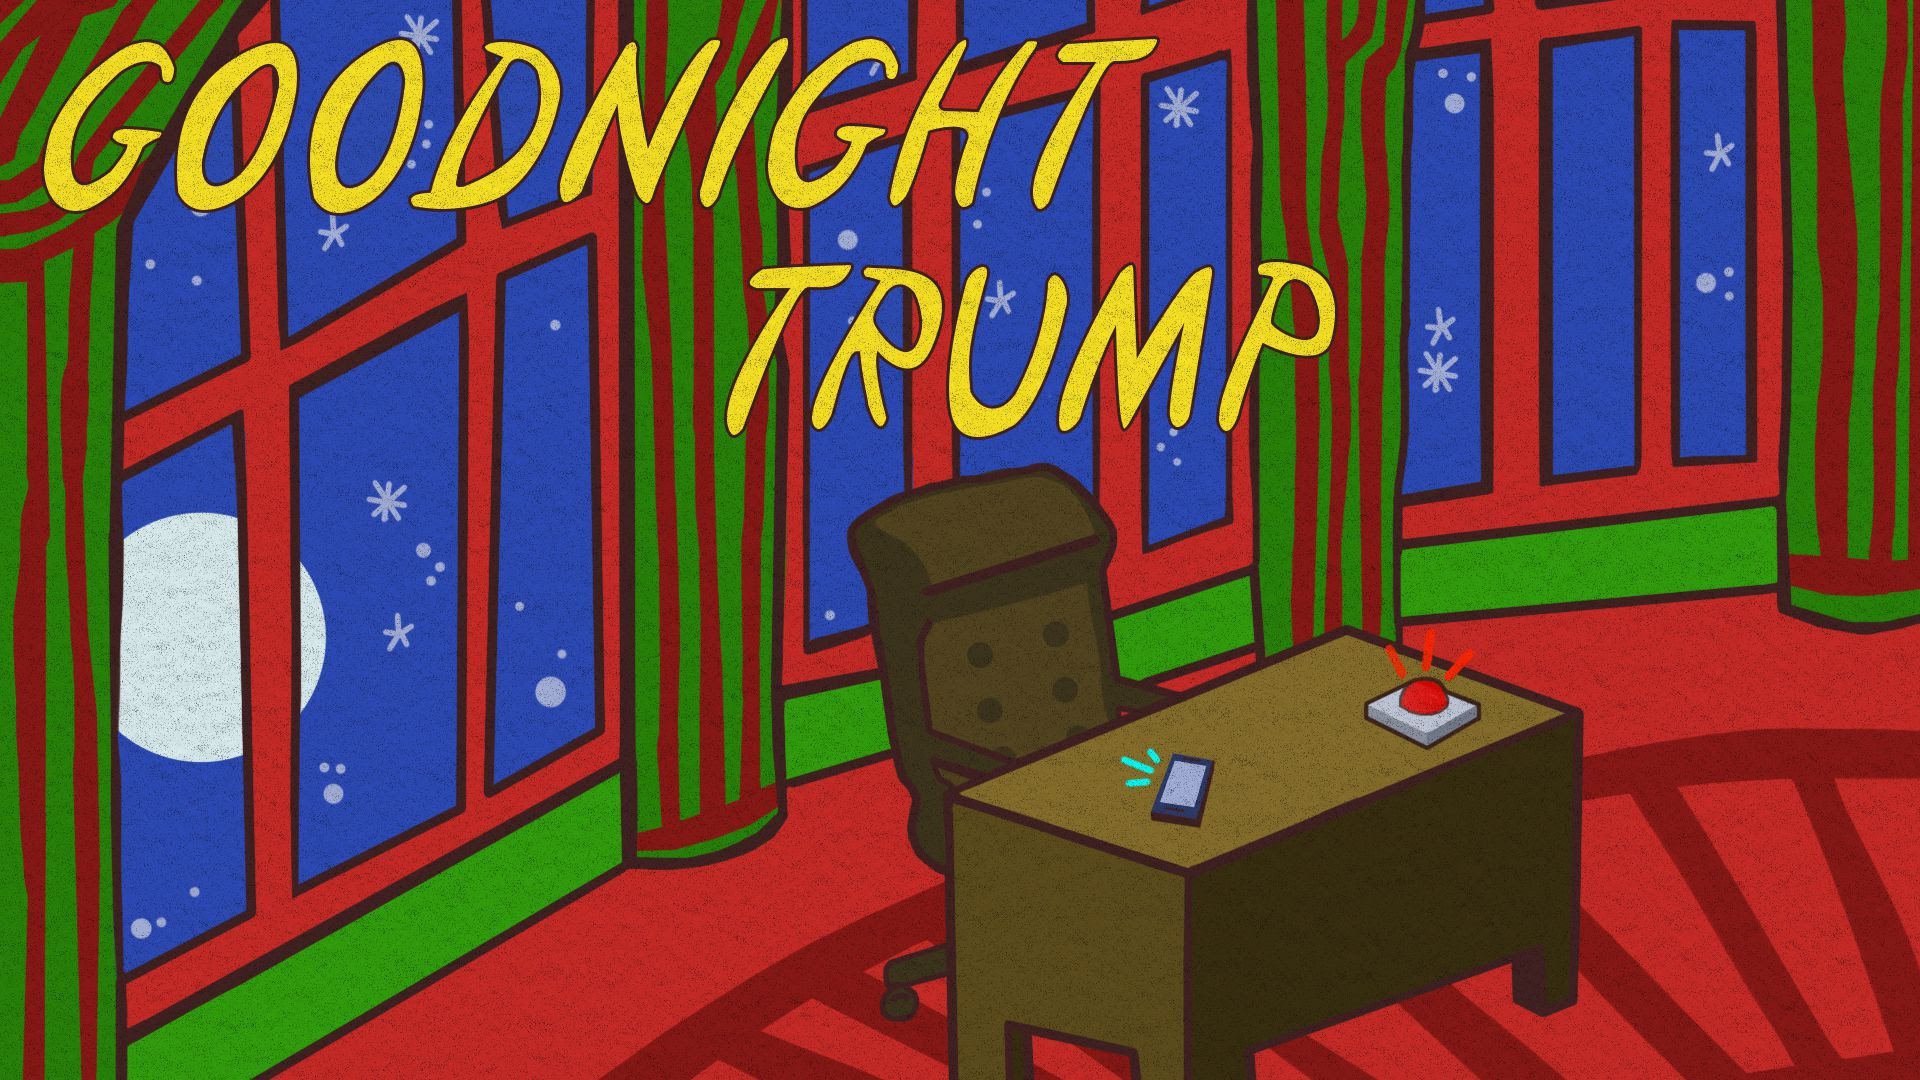 An illustration of a book cover titled "Goodnight Trump" that mirrors "Goodnight Moon"